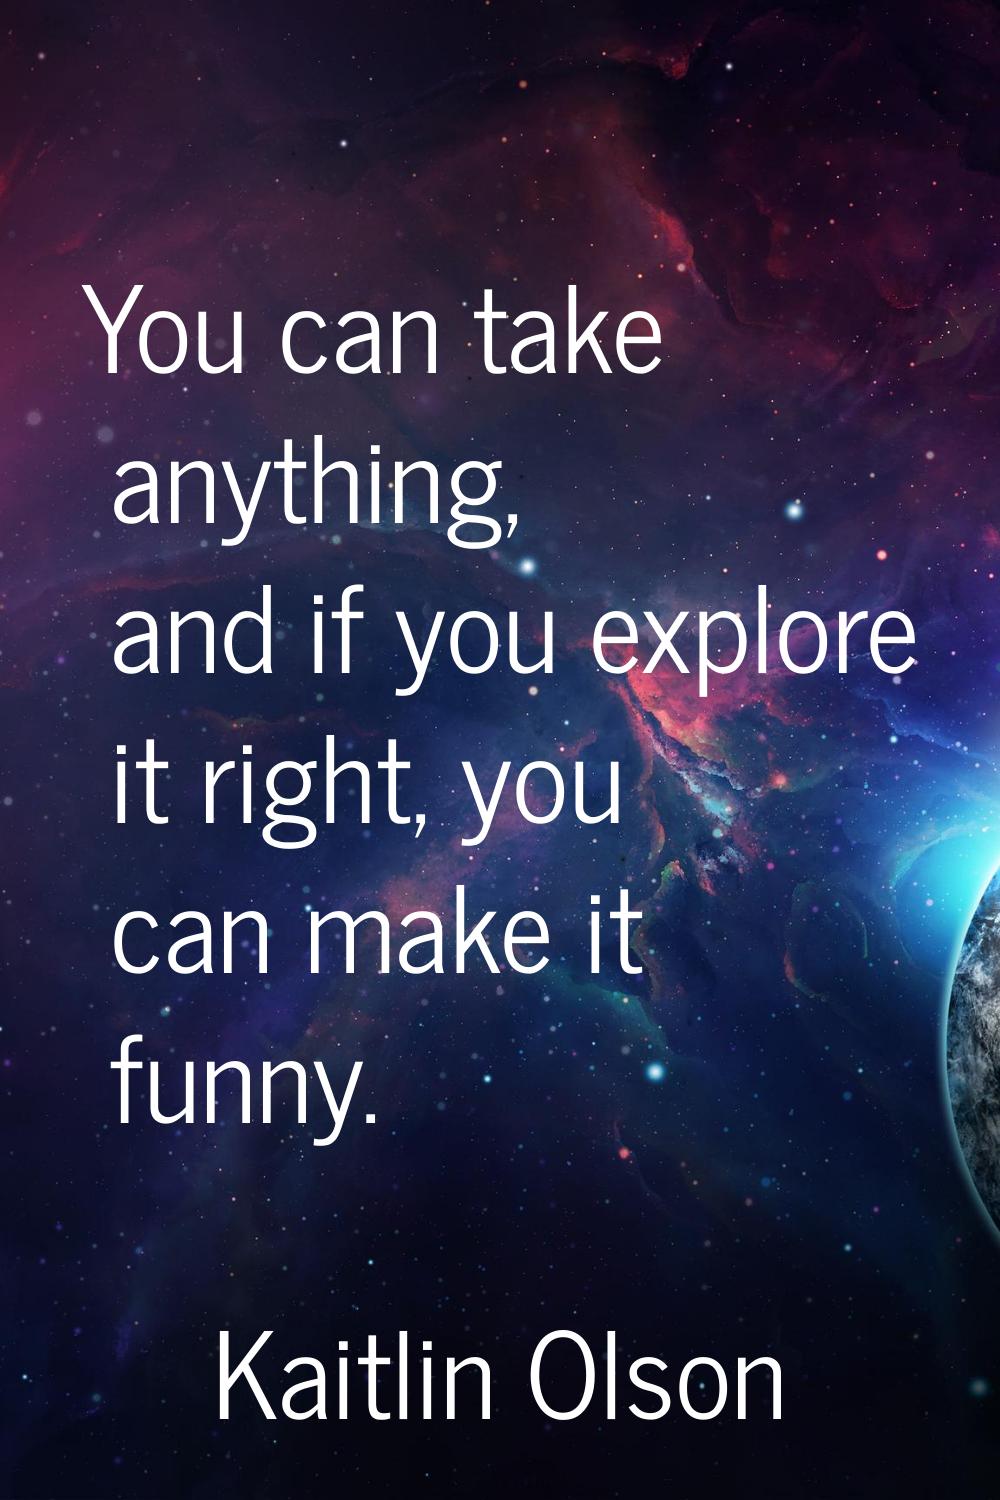 You can take anything, and if you explore it right, you can make it funny.